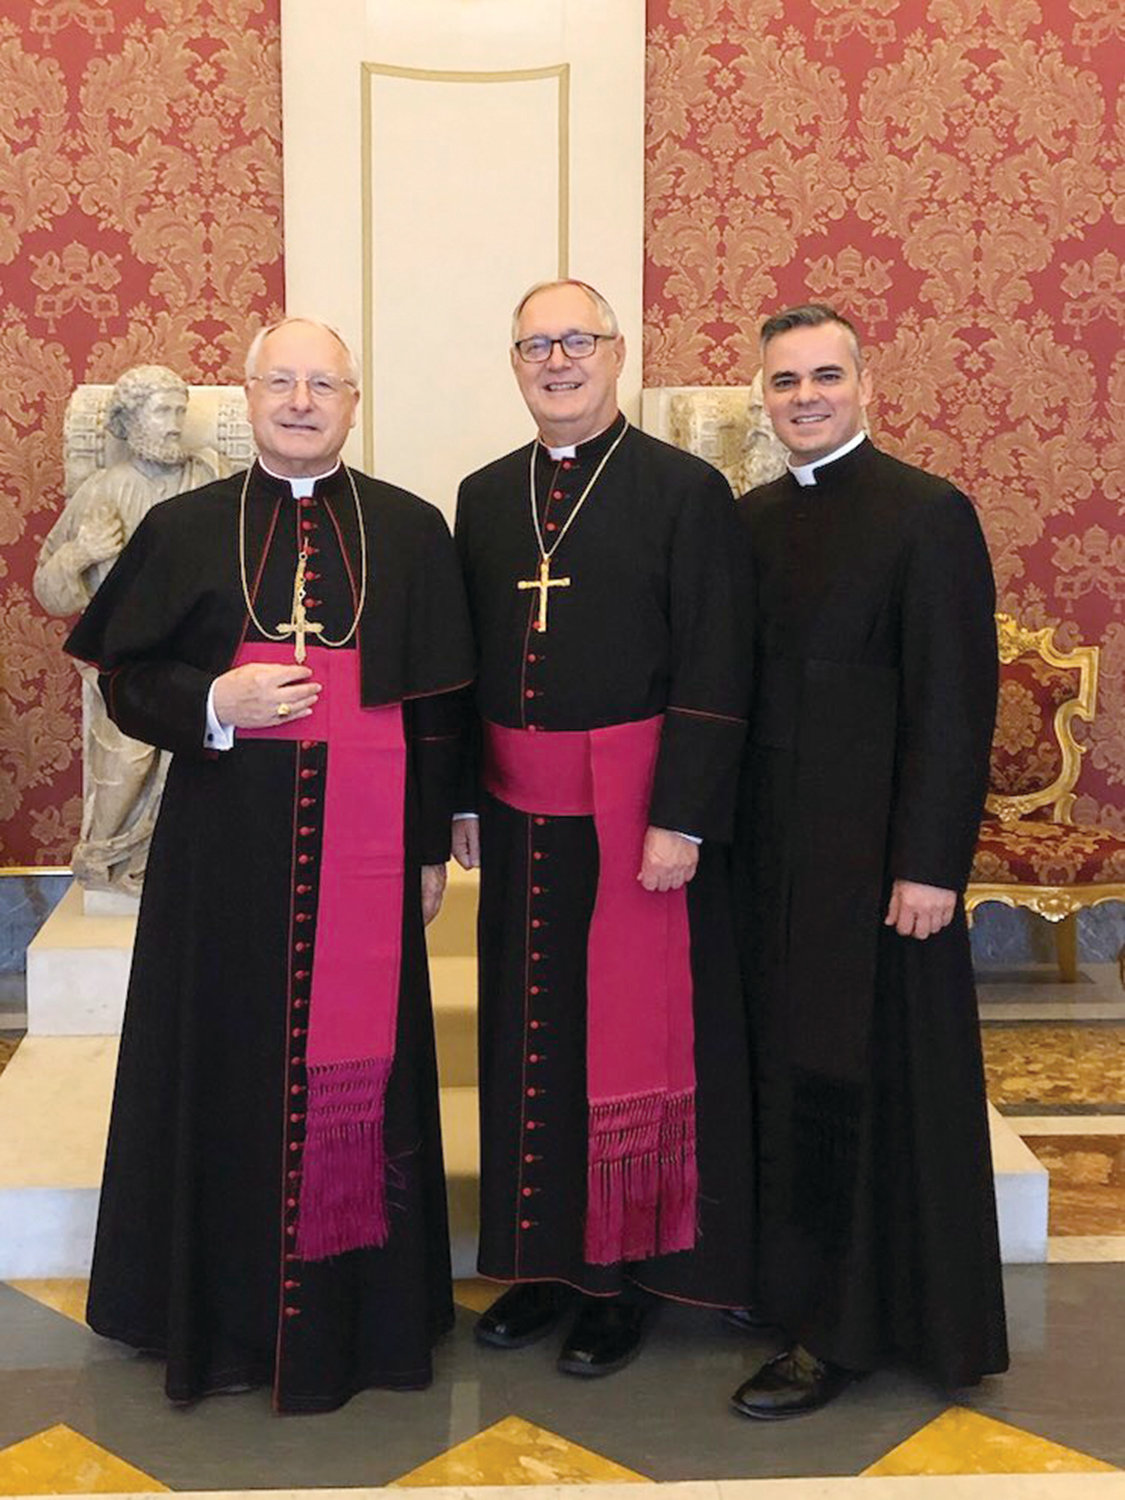 From left, Auxiliary Bishop Robert C. Evans, Bishop Thomas J. Tobin and Administrative Secretary Father Jeremy Rodrigues at the Apostolic Palace just before meeting the Holy Father.